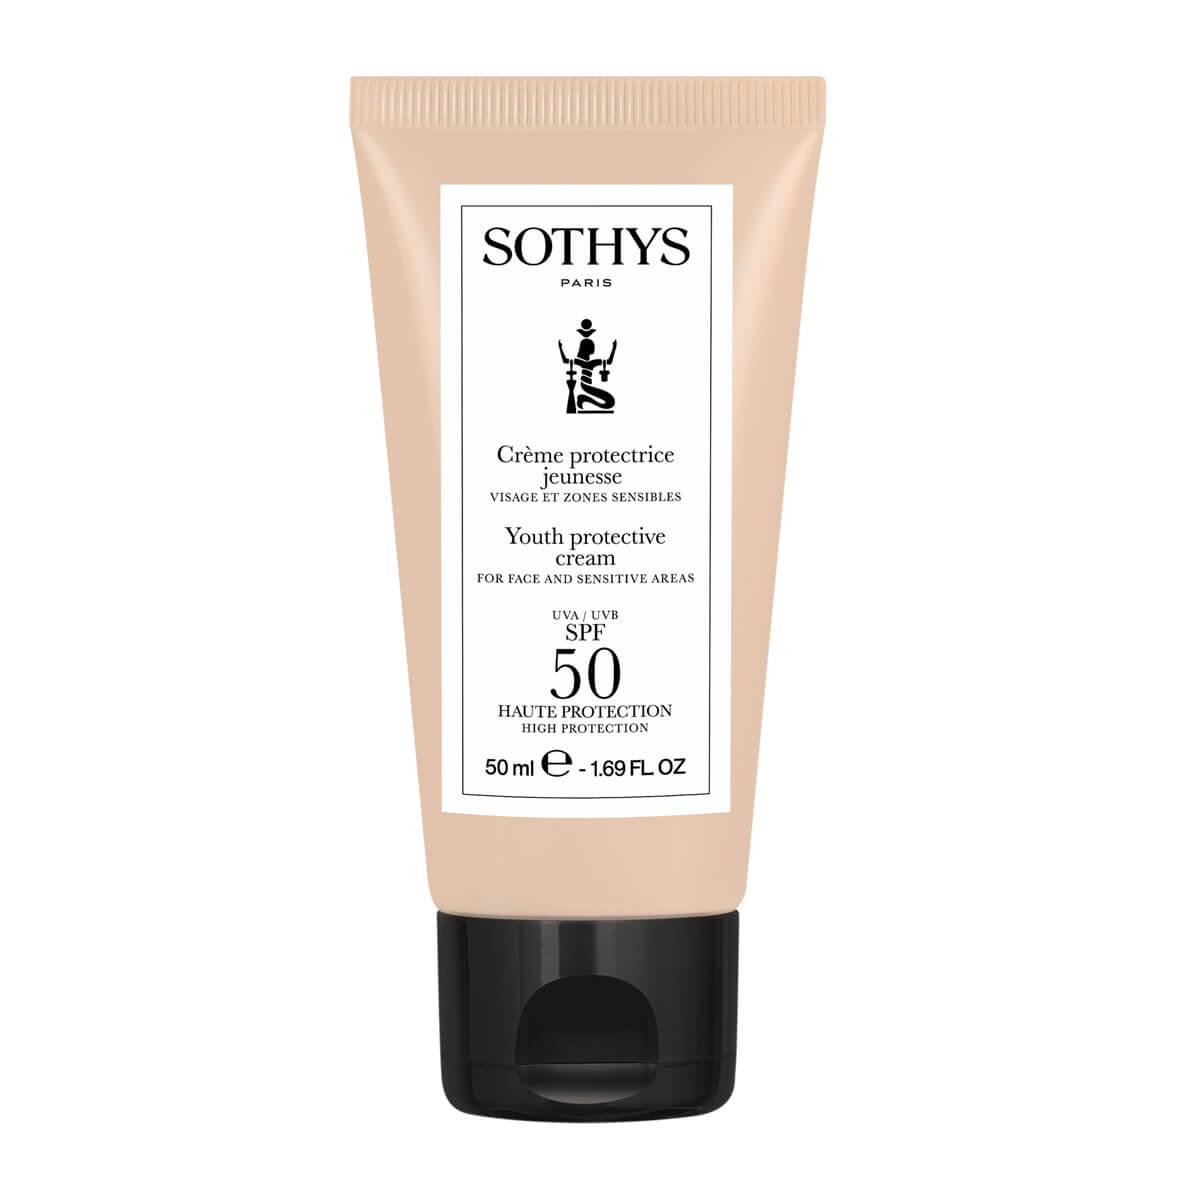 Sothys Youth Protective Cream for Face and Sensitive Areas SPF50